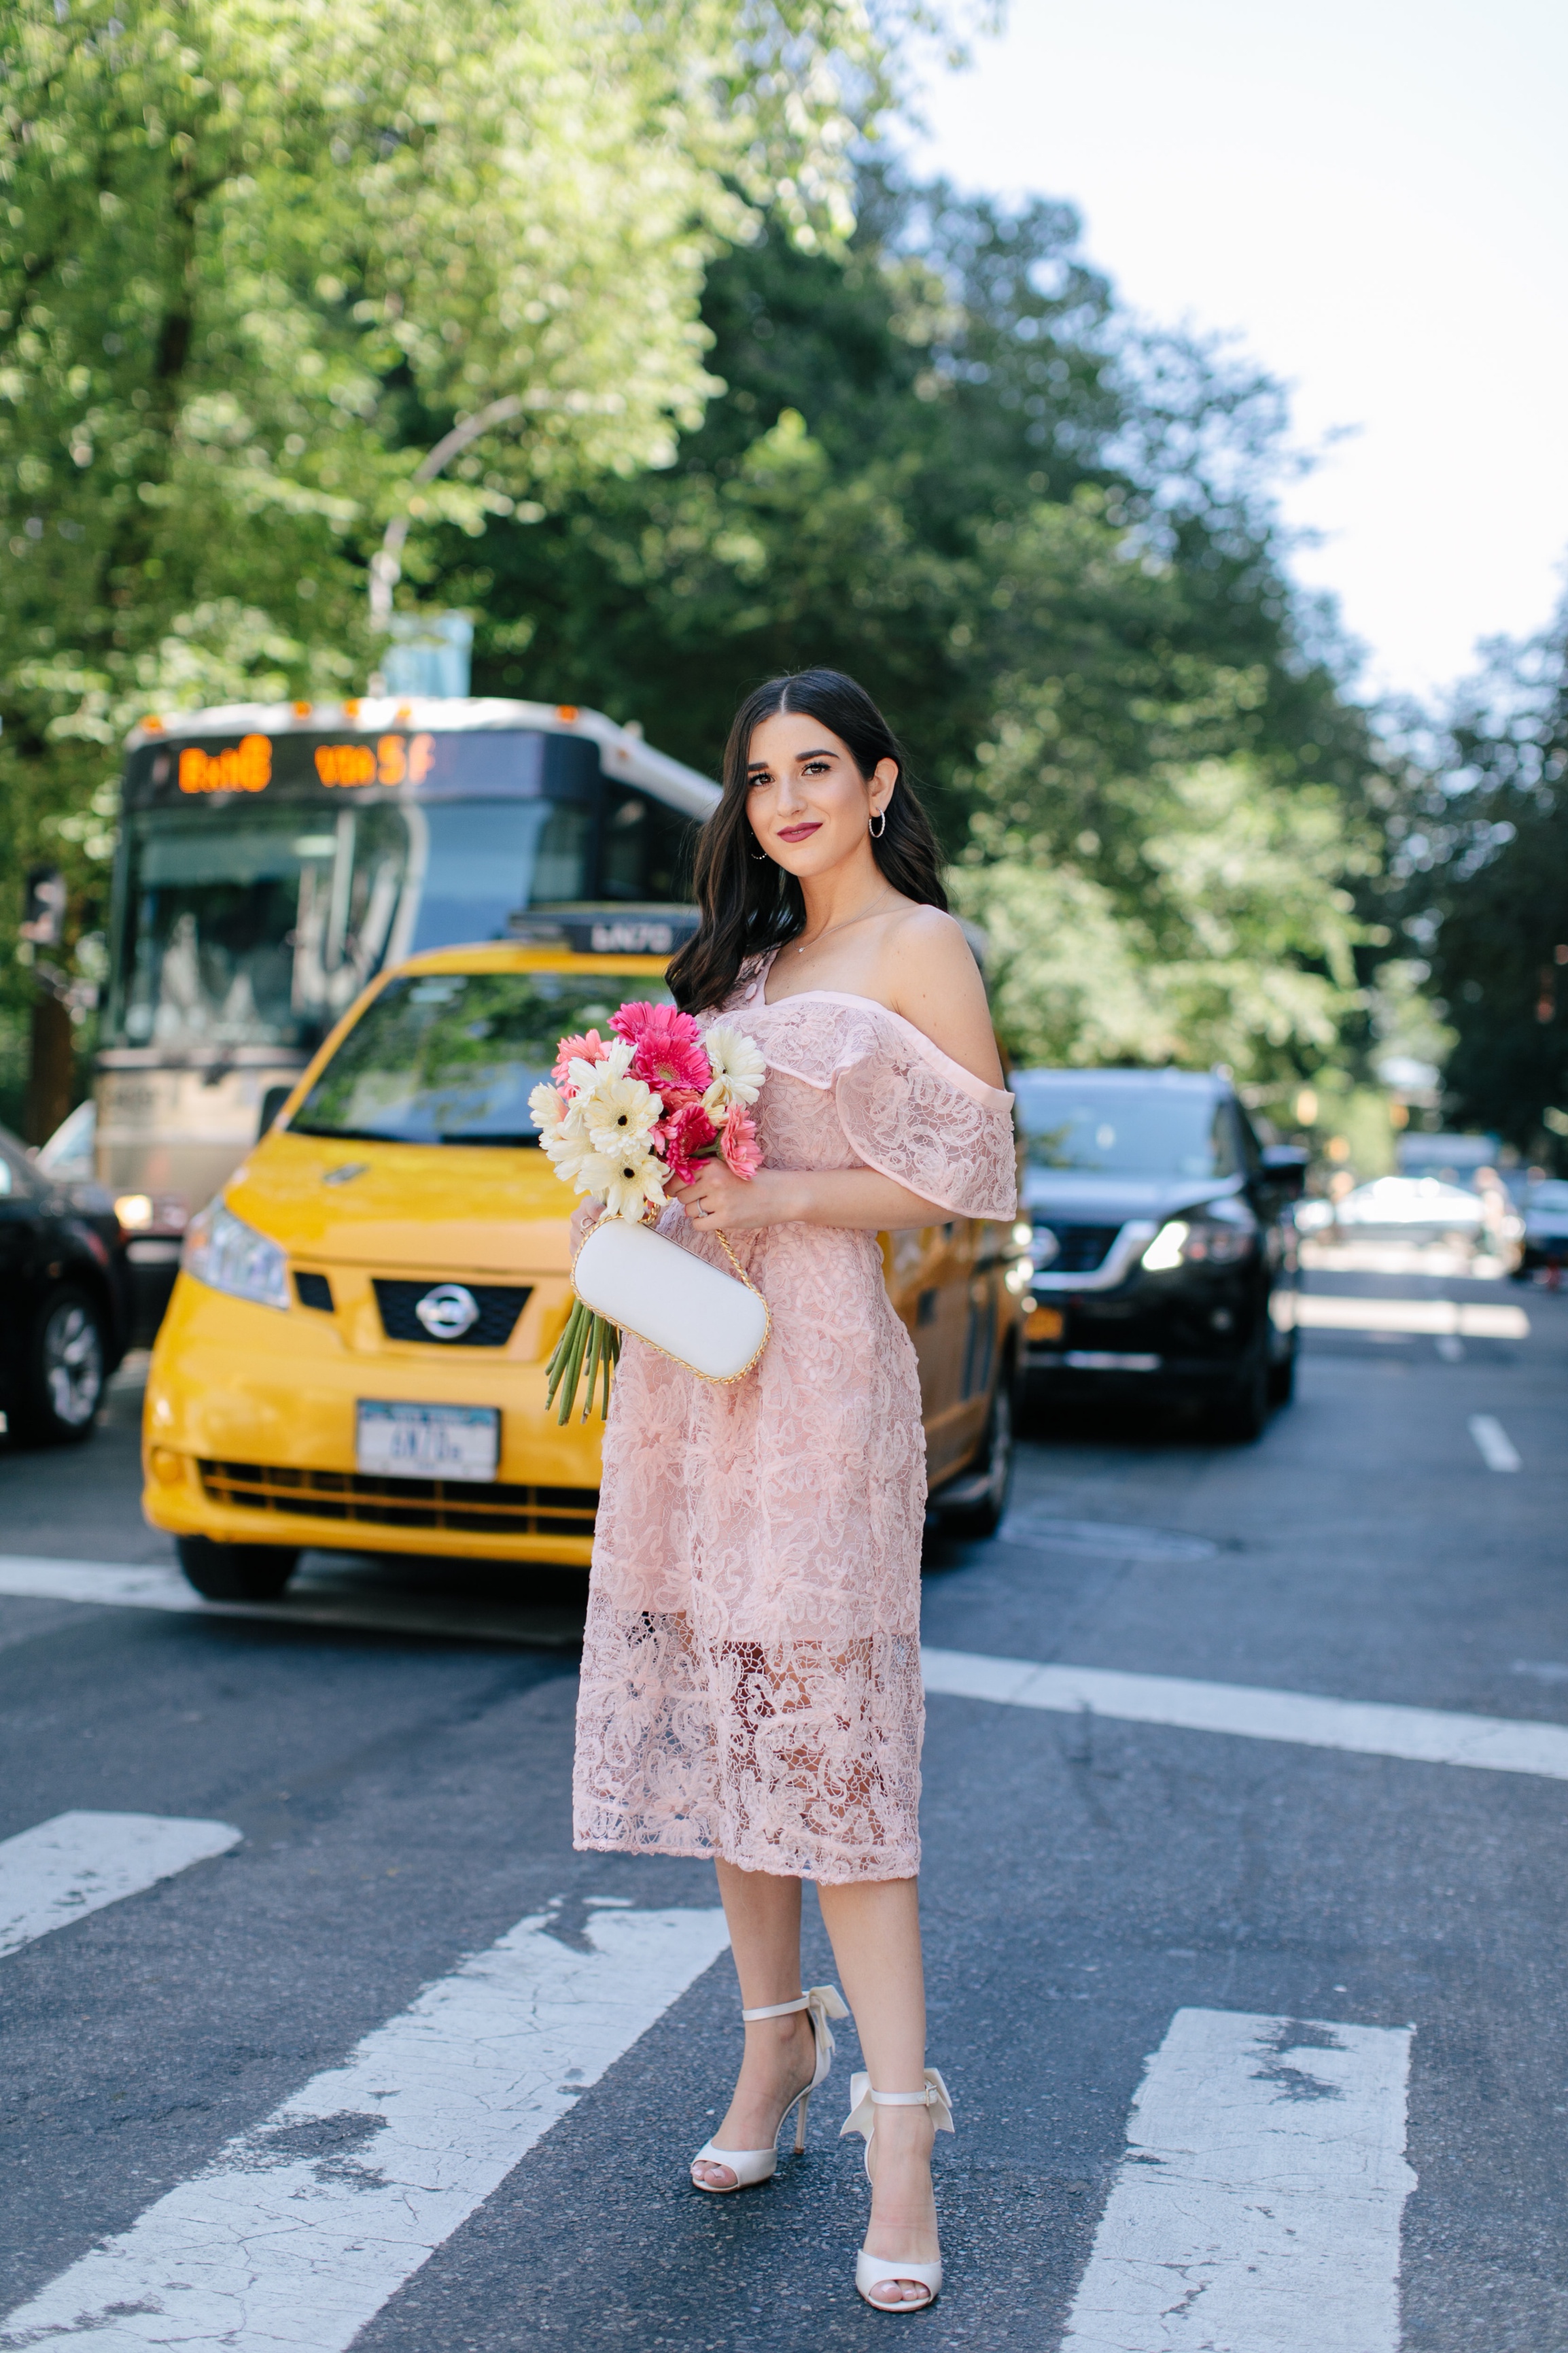 A New Perspective On Instagram Jealousy Pink Lace Dress Ivory Bow Heels Esther Santer Fashion Blog NYC Street Style Blogger Outfit OOTD Trendy Formal White Bag Clutch Self Portrait Designer Kate Spade Wedding Shoes Fancy Elegant Feminine Wear Shopping.jpg